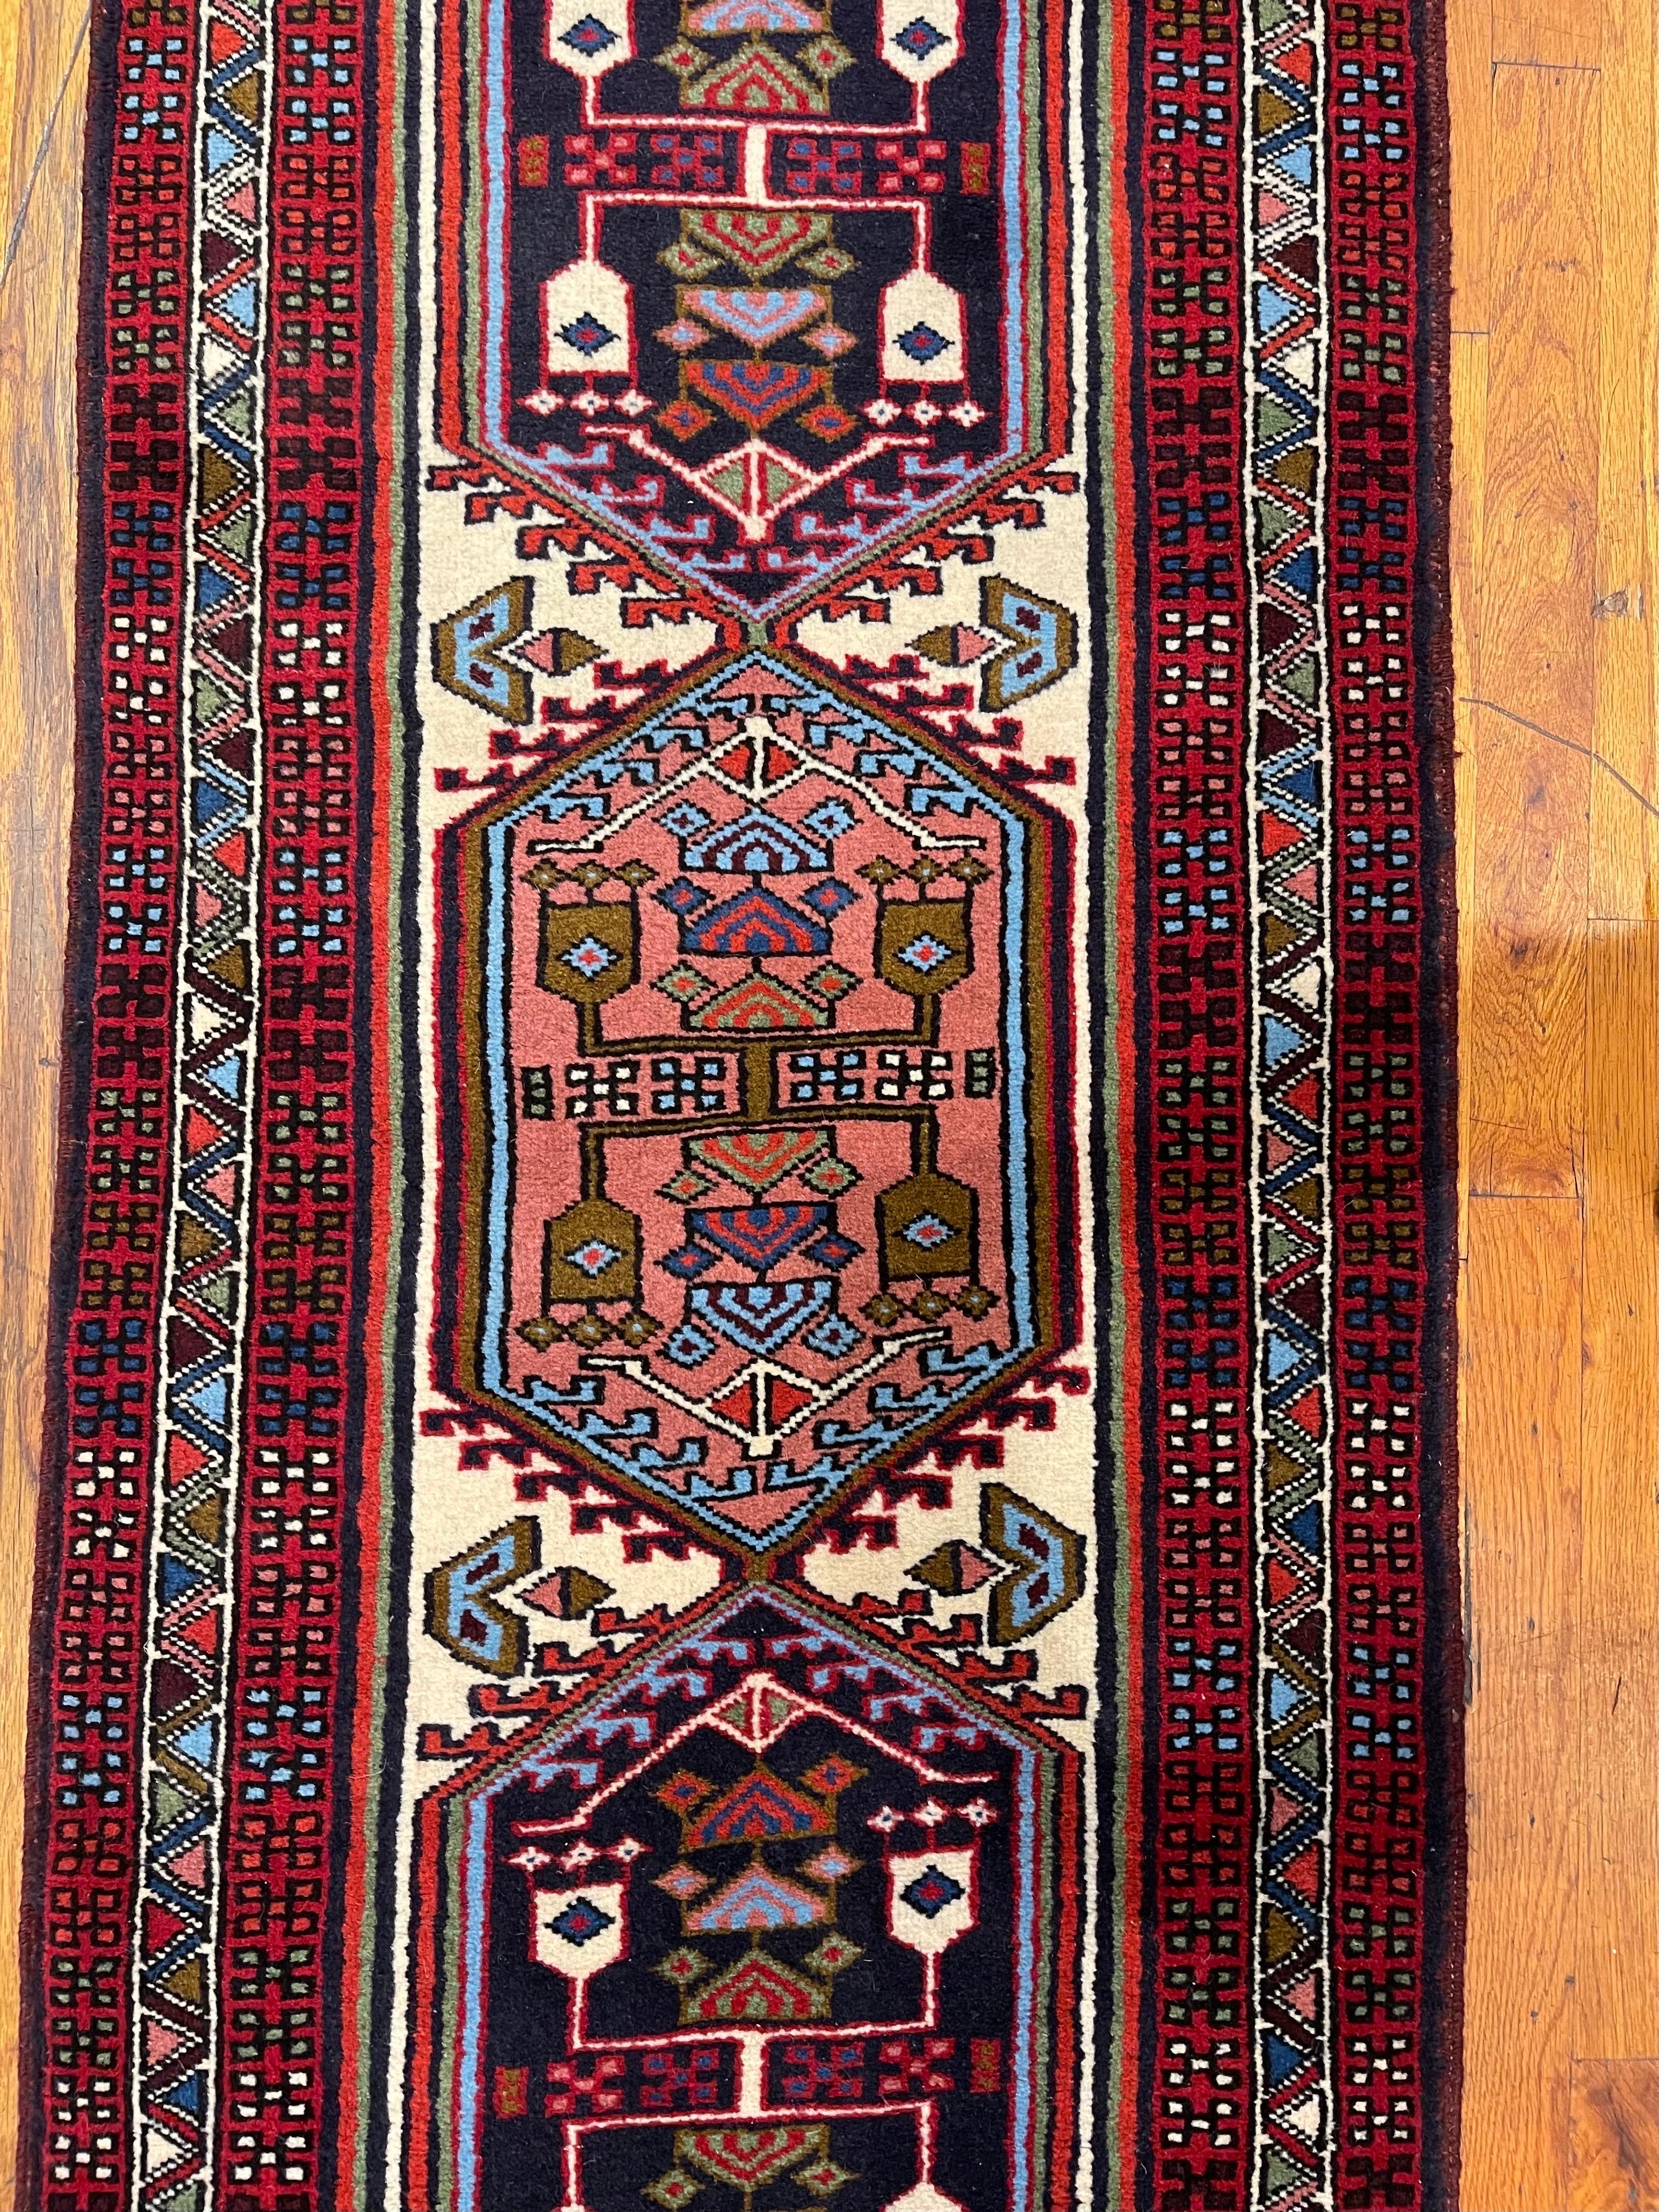 This runner is knotted in the province of Azarbayjan in north-west of Iran. This city is perhaps as ancient rug weaving tradition as is the entire rug history. The design in this piece is geometric with repeated medallion and tribal motifs inspired